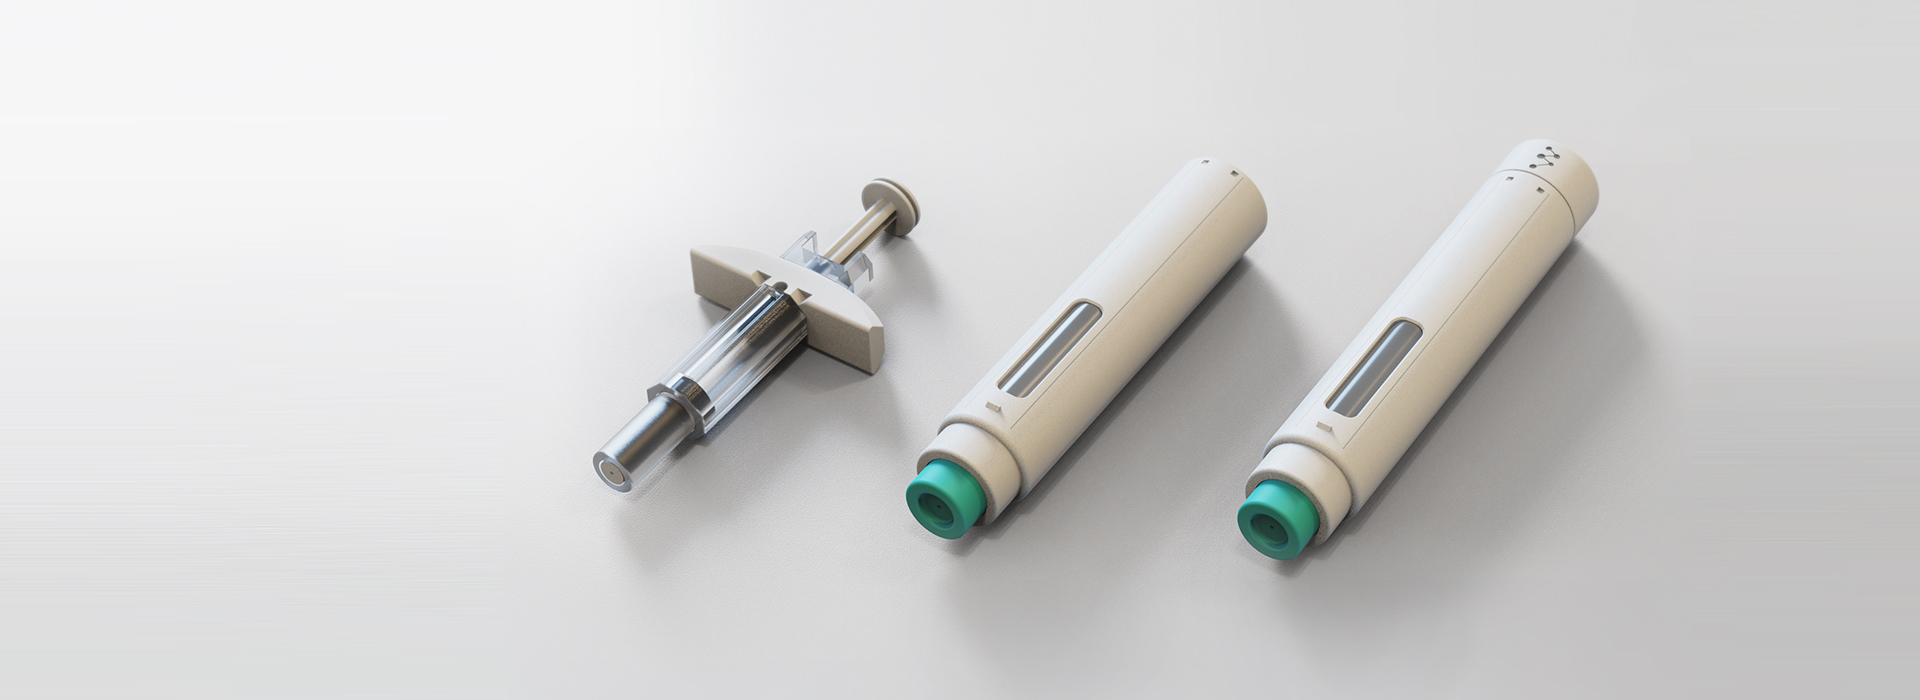 three-different-types-of-injectors-with-varying-complexity-1